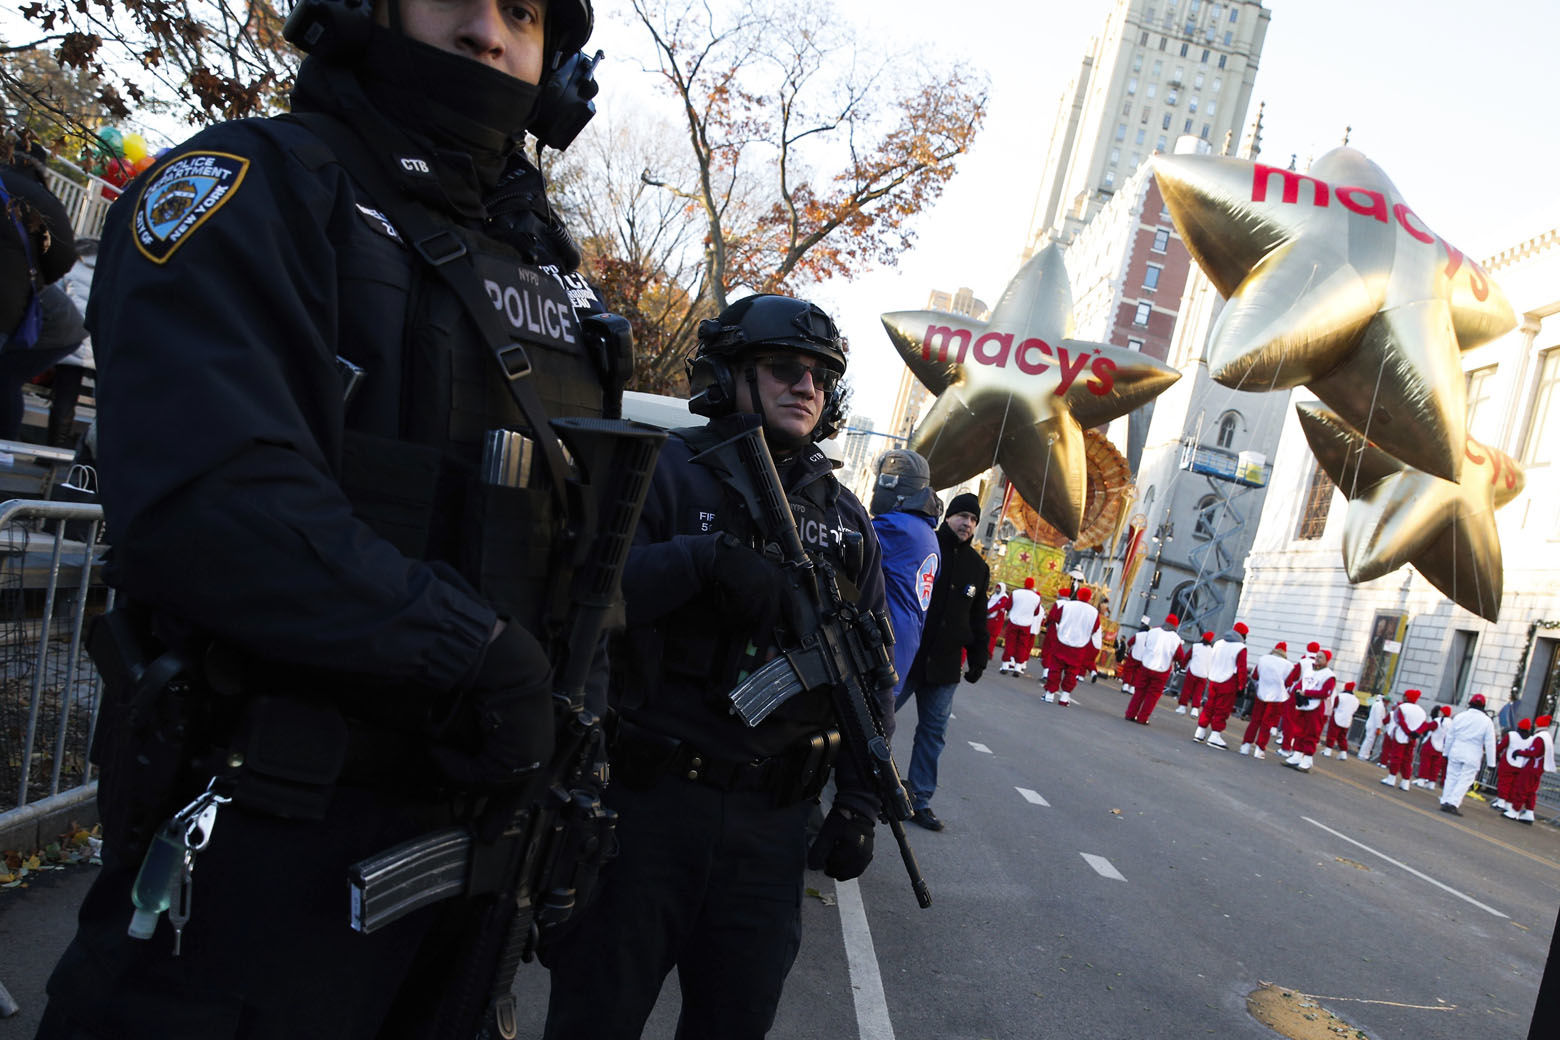 Members of the New York Police Department take a position along the route before the start of the 92nd annual Macy's Thanksgiving Day Parade in New York, Thursday, Nov. 22, 2018. (AP Photo/Eduardo Munoz Alvarez)